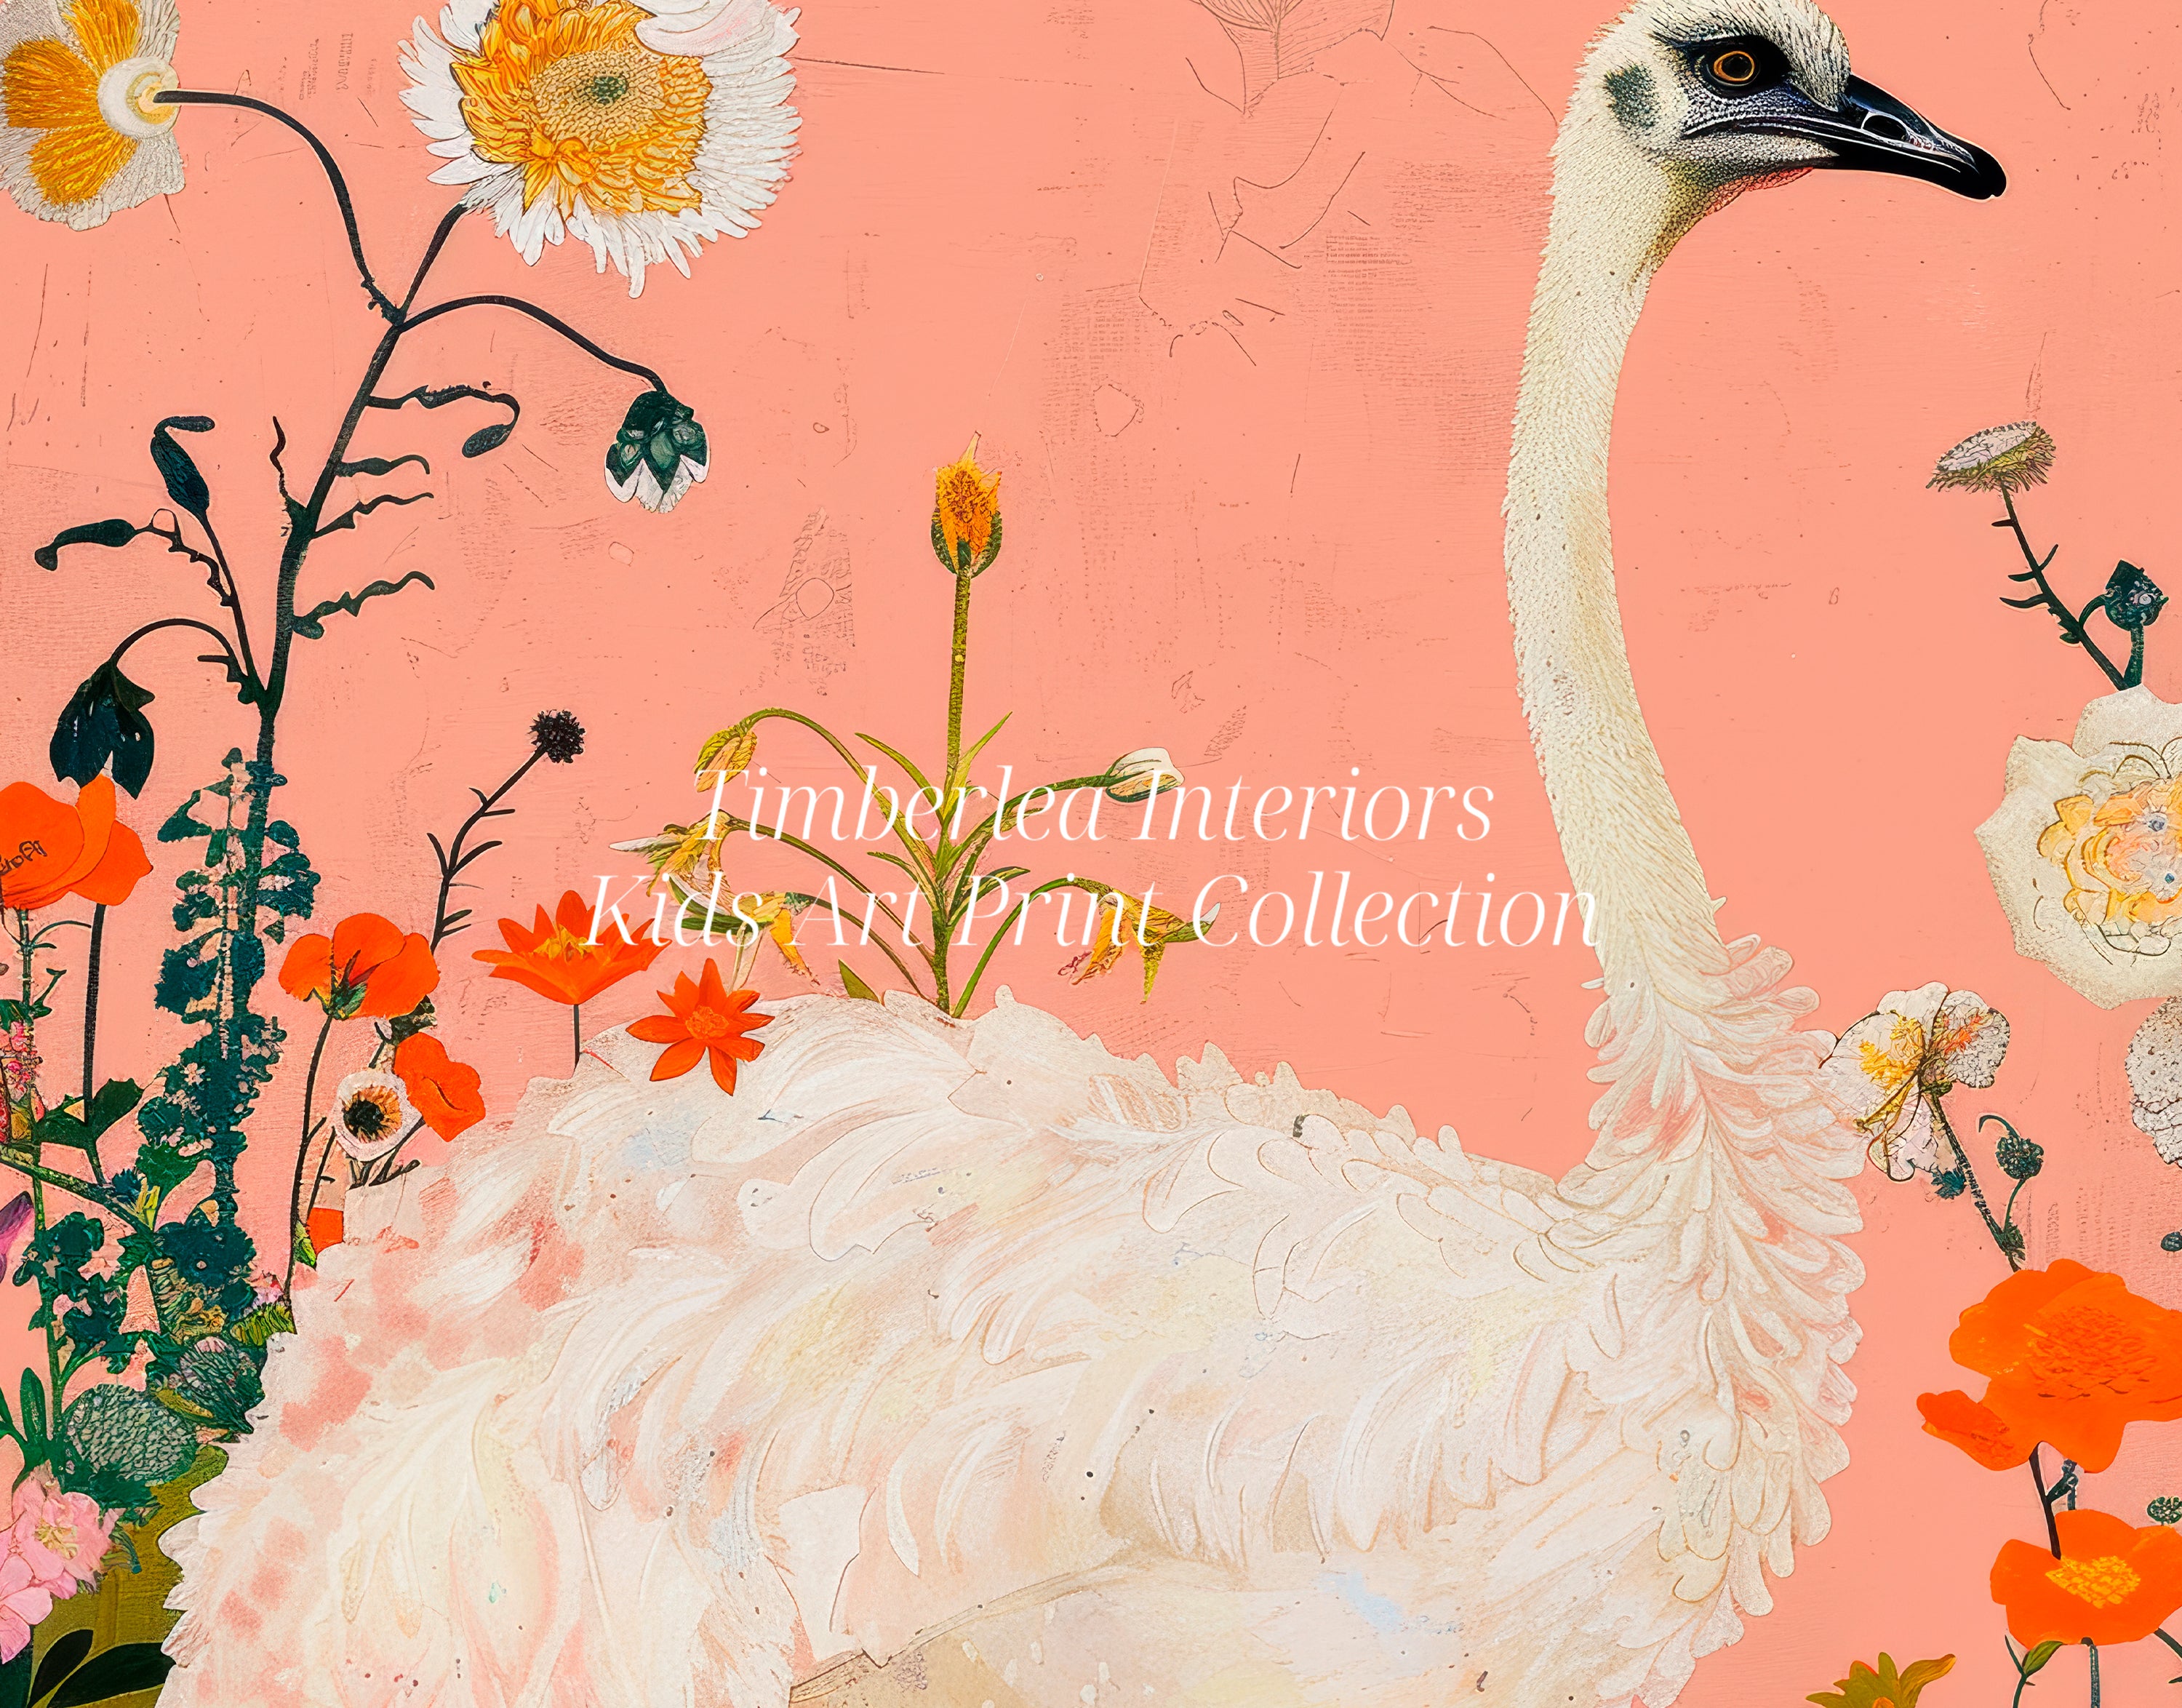 Close-up view of the Ethereal Ostrich Garden Art Print featuring a detailed ostrich with soft white feathers surrounded by vibrant orange and white flowers against a peach background.